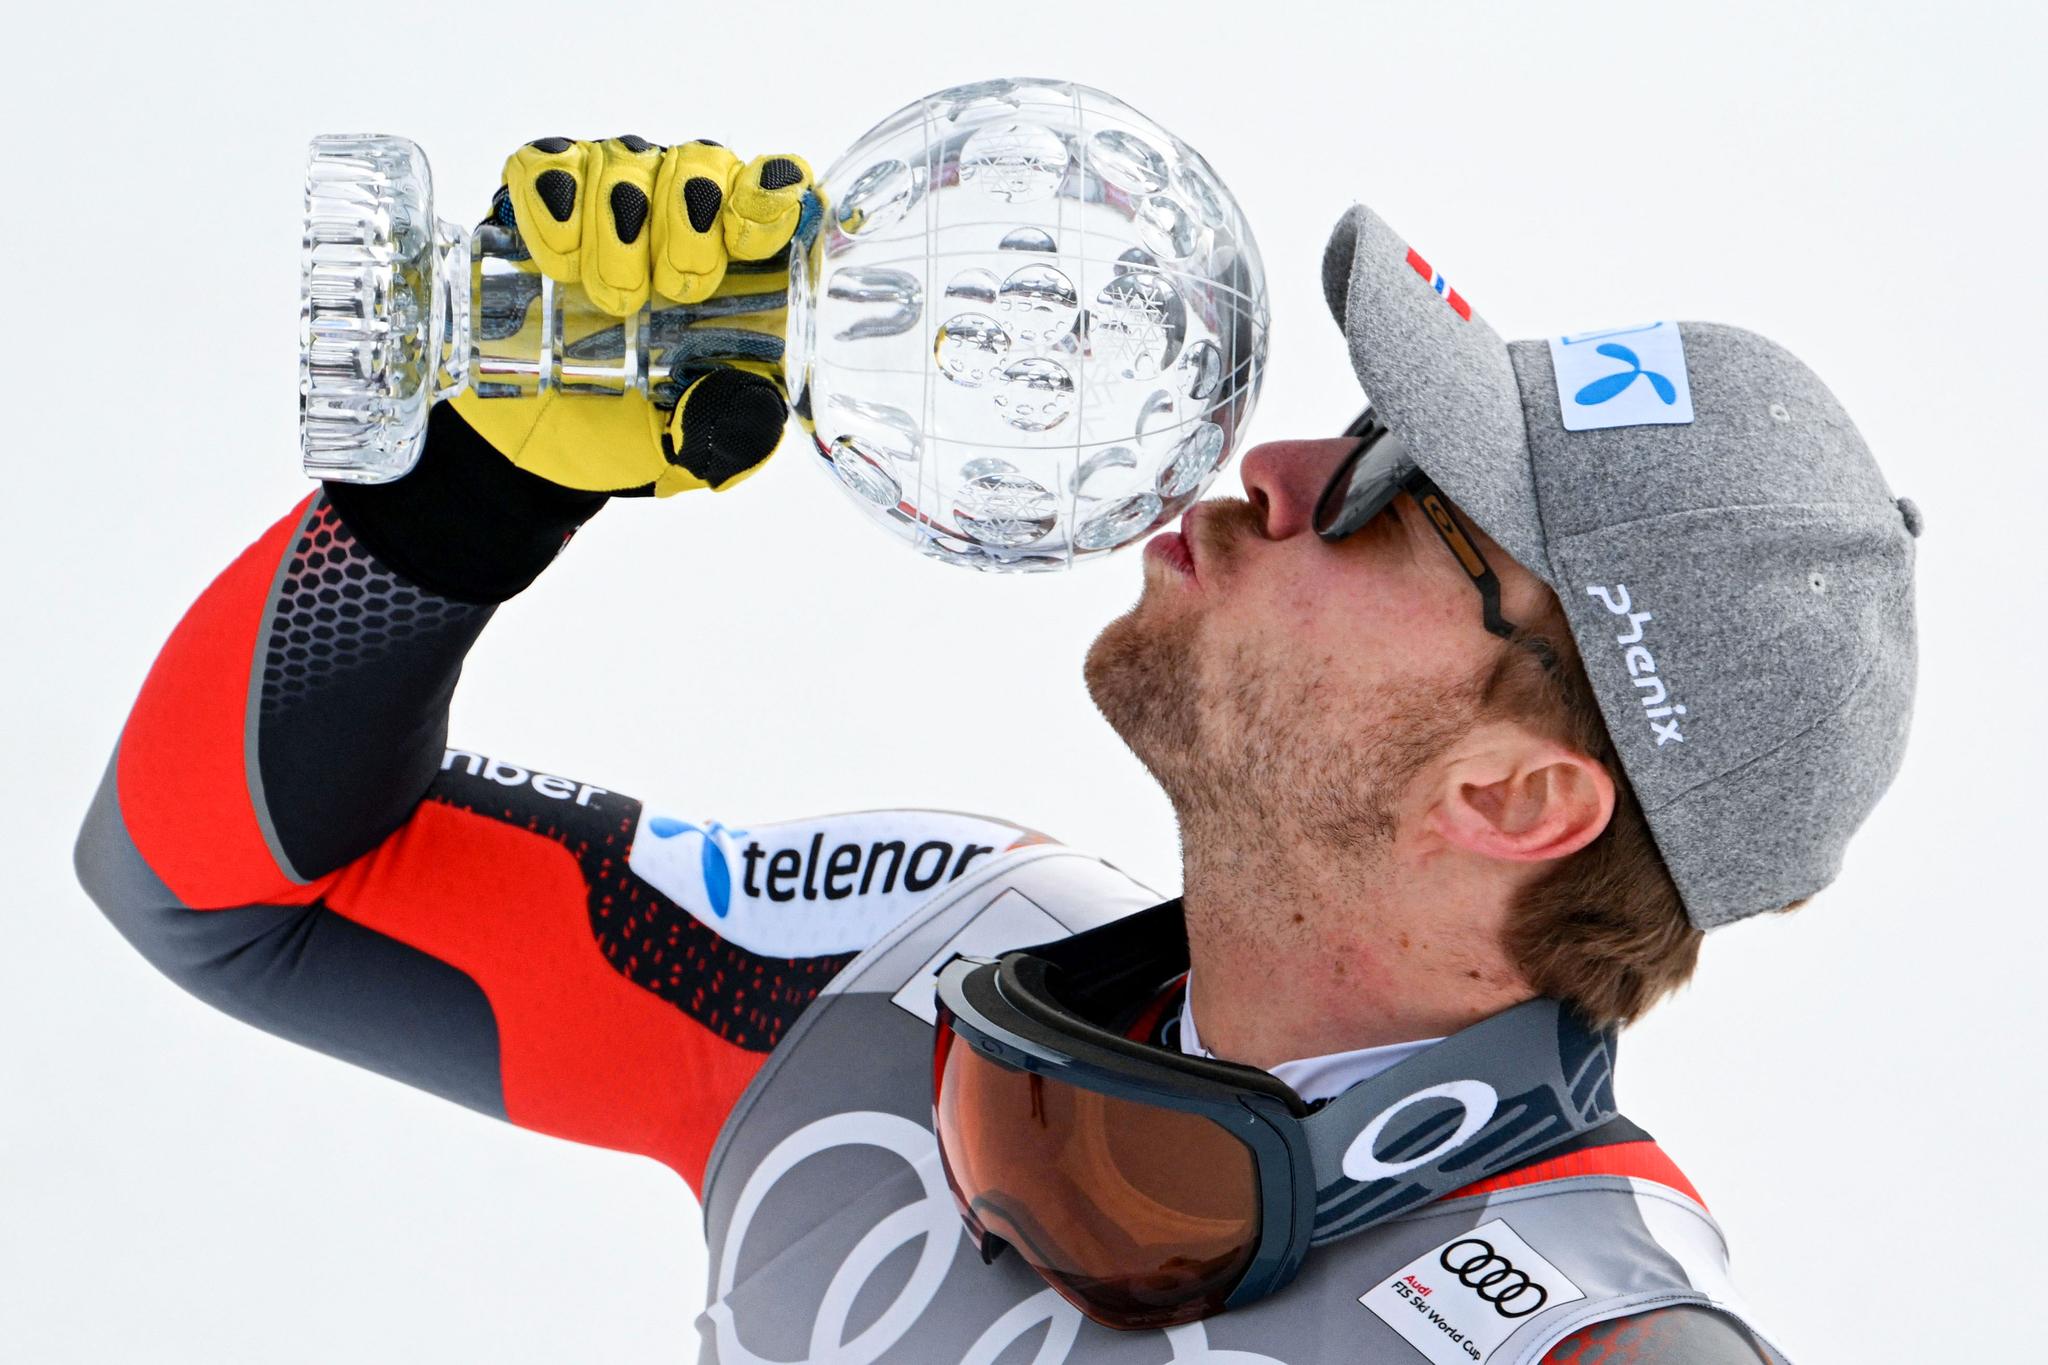 Aleksander Aamodt Kilde wins the World Cup downhill: – Absolutely fantastic